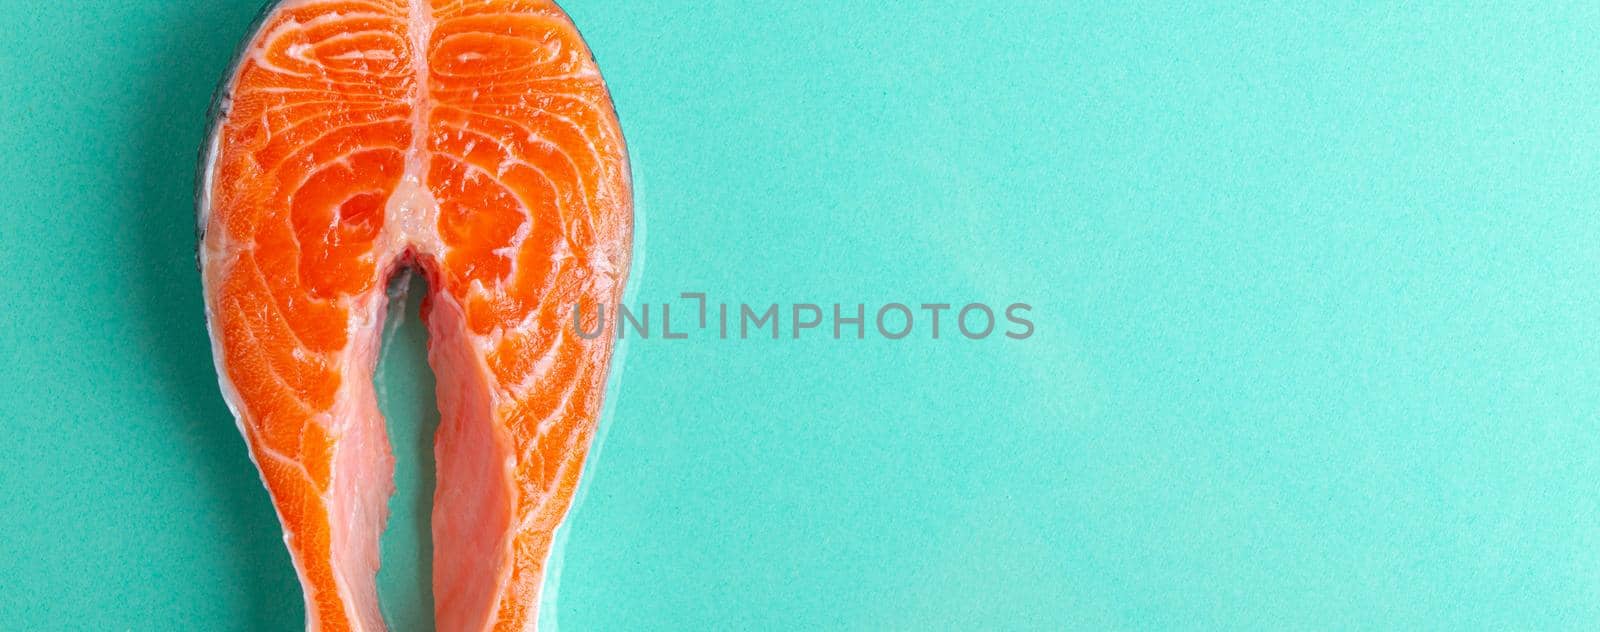 Uncooked raw fresh fish salmon steak top view on blue clean background from above by its_al_dente